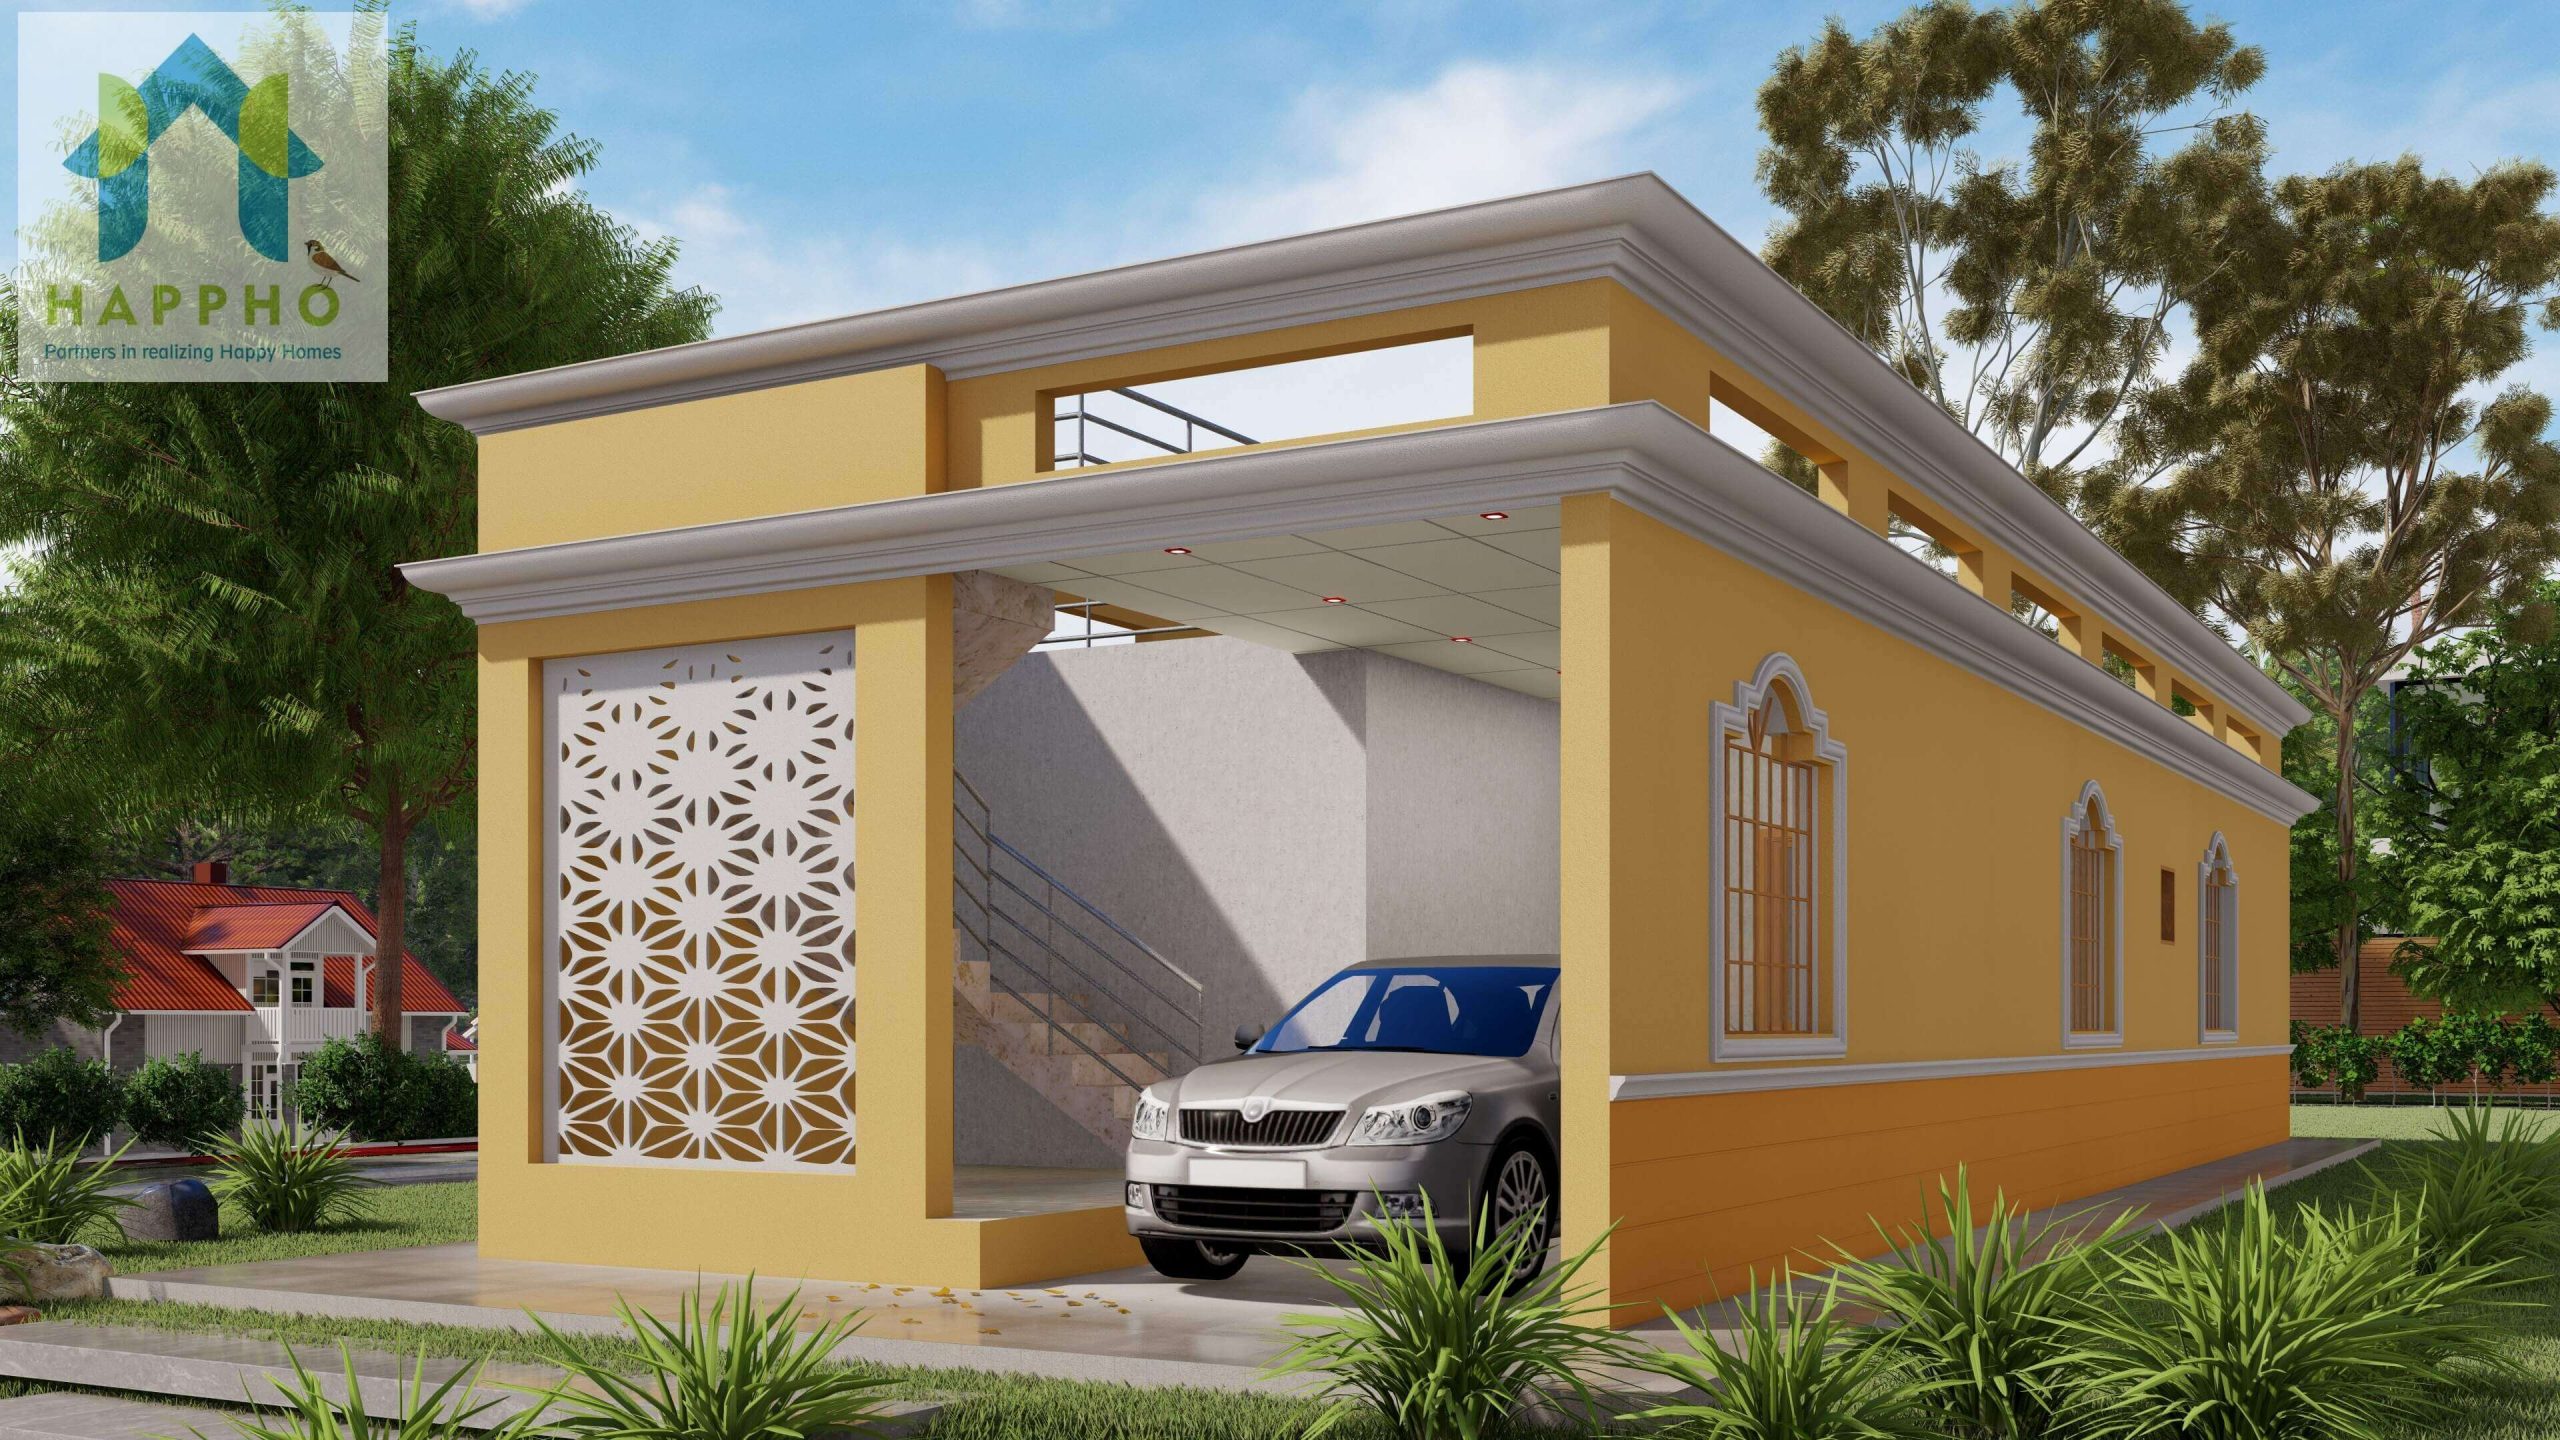 2 bedroom house 3d design in yellow color